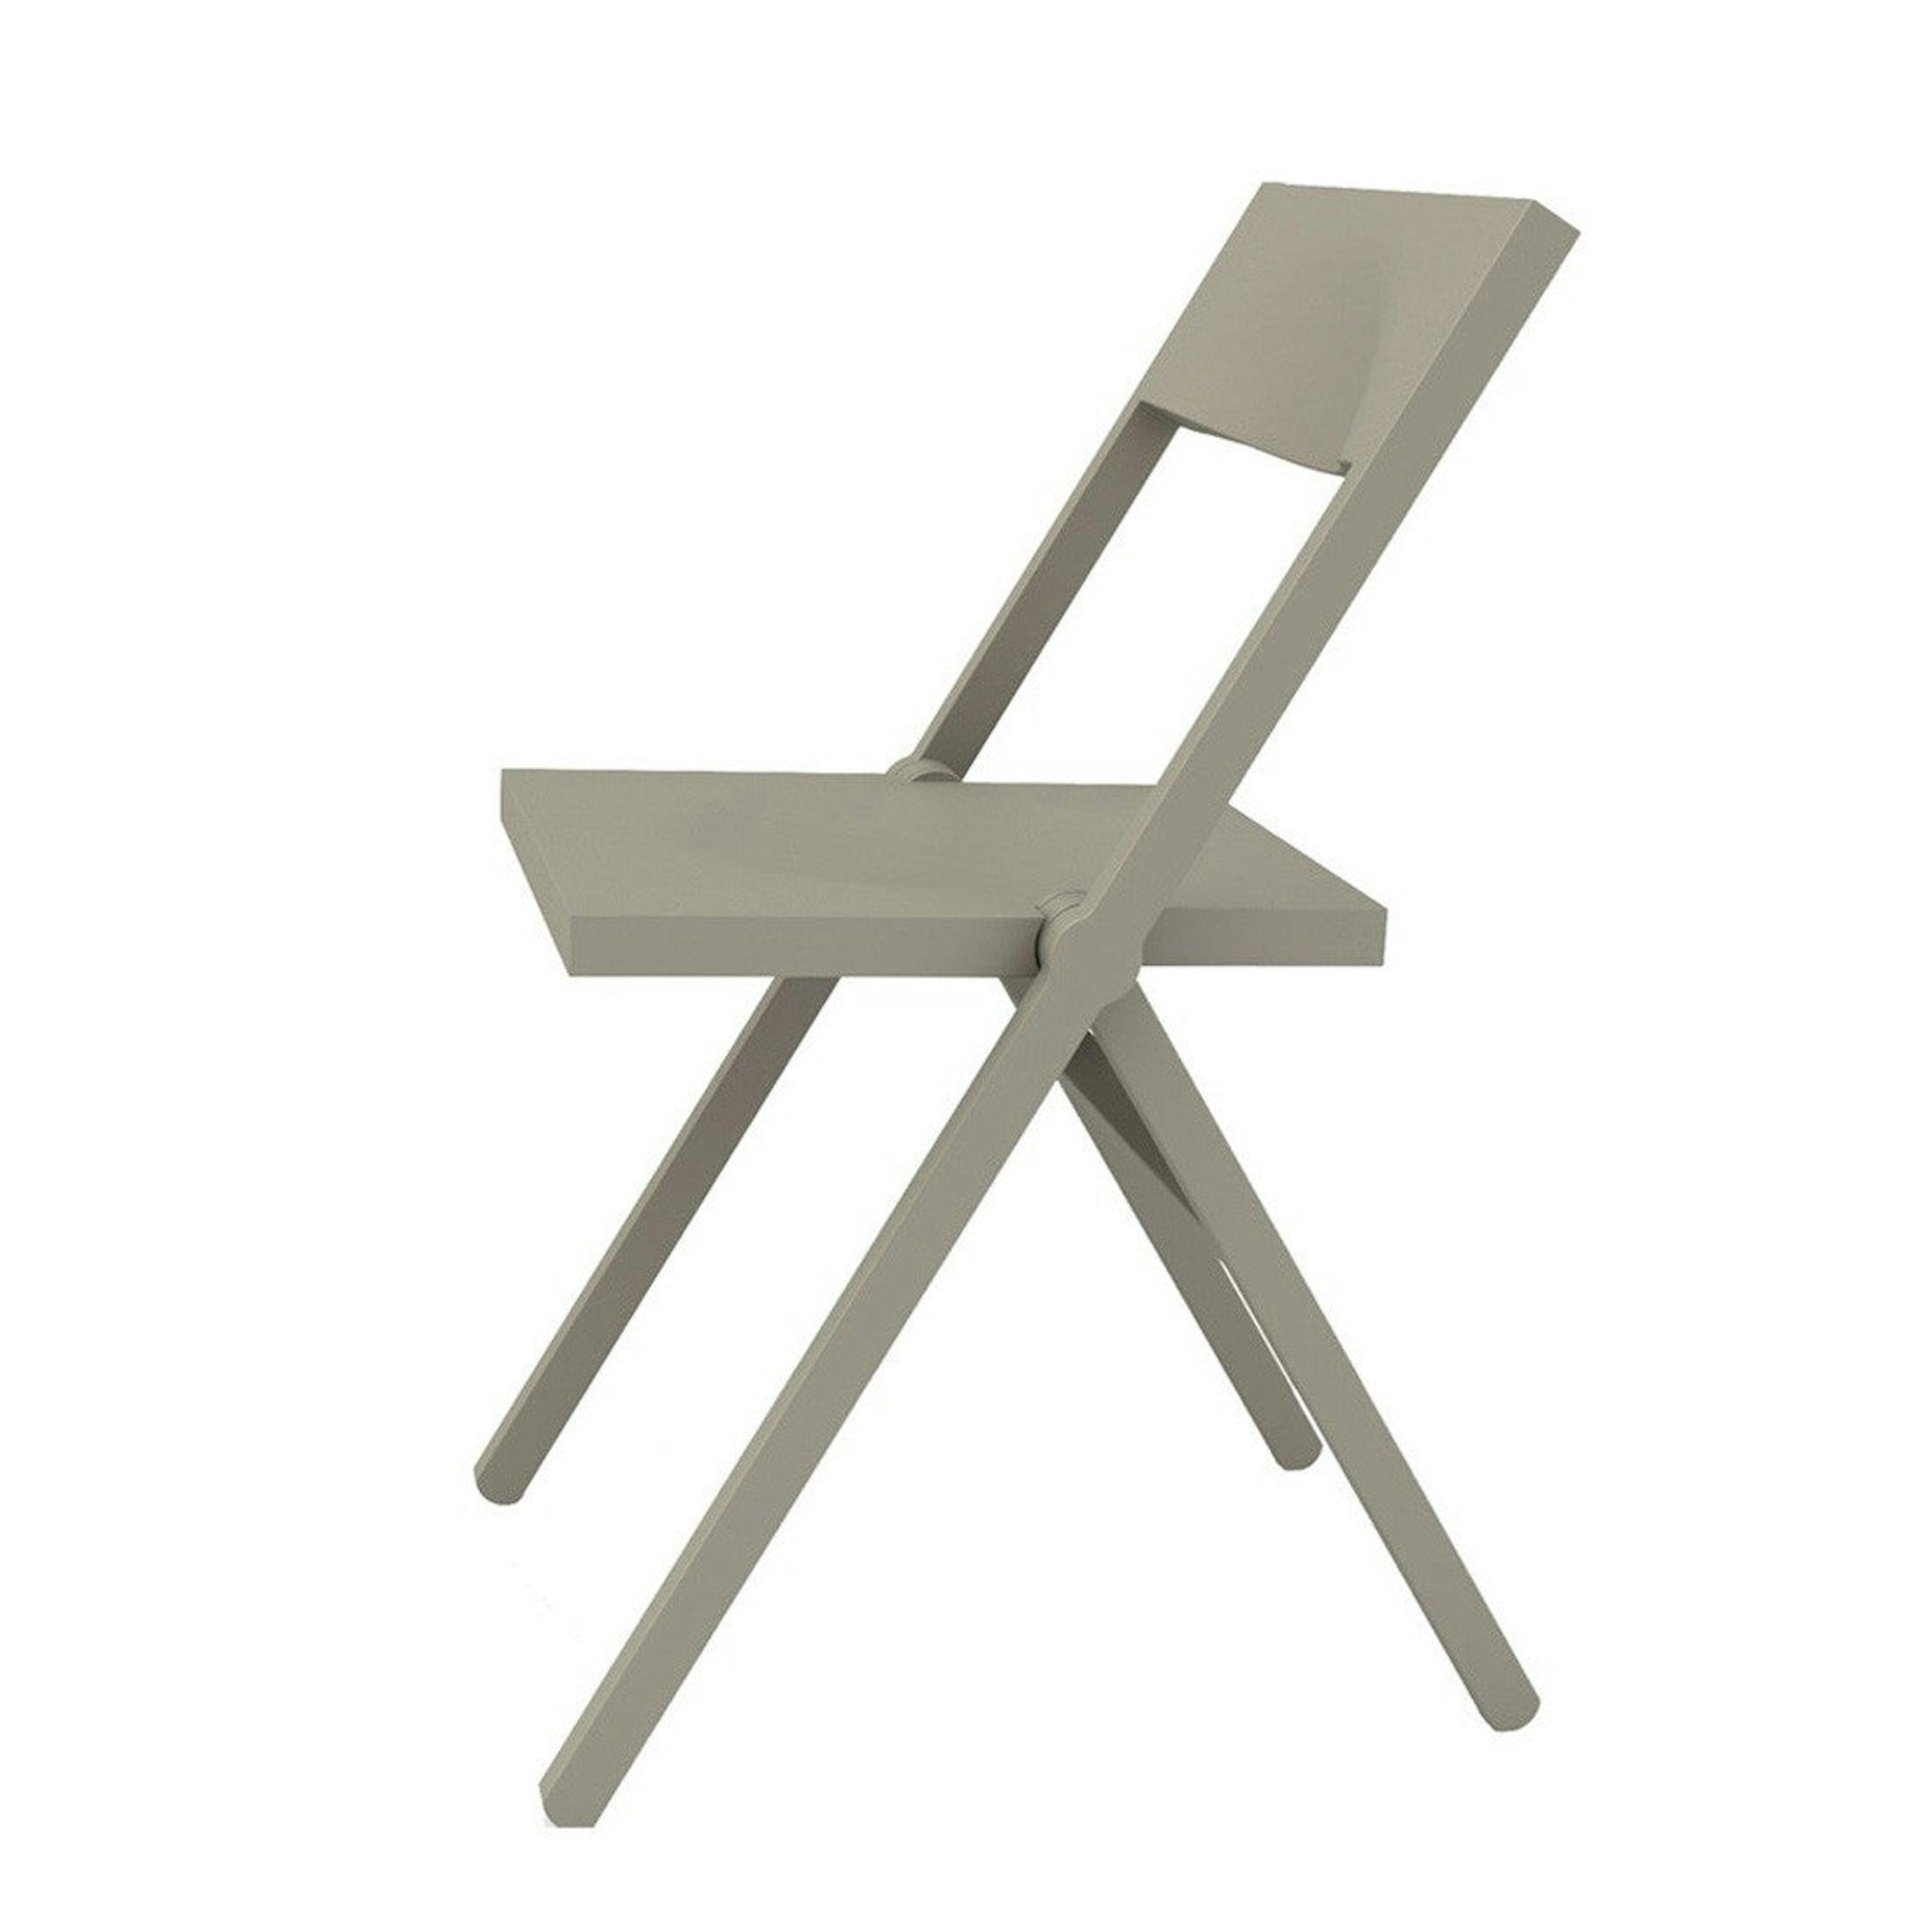 Piana Folding chair by Alessi